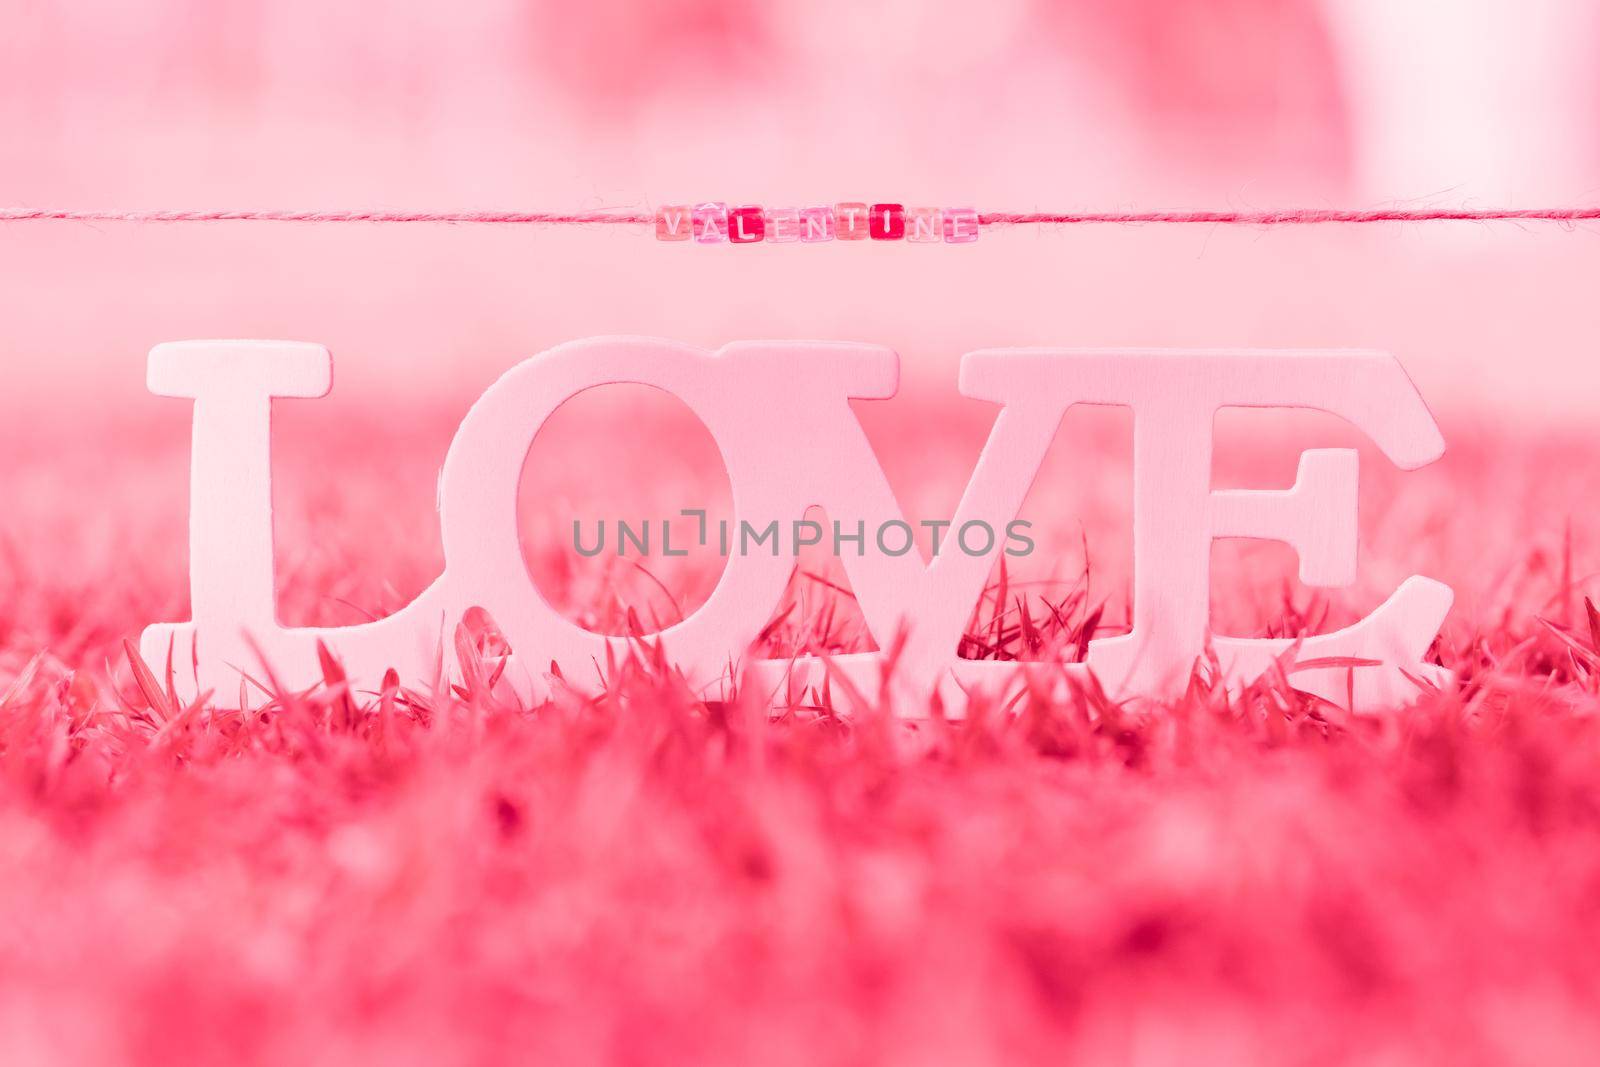 LOVE text, valentines day background romantic moment in nature